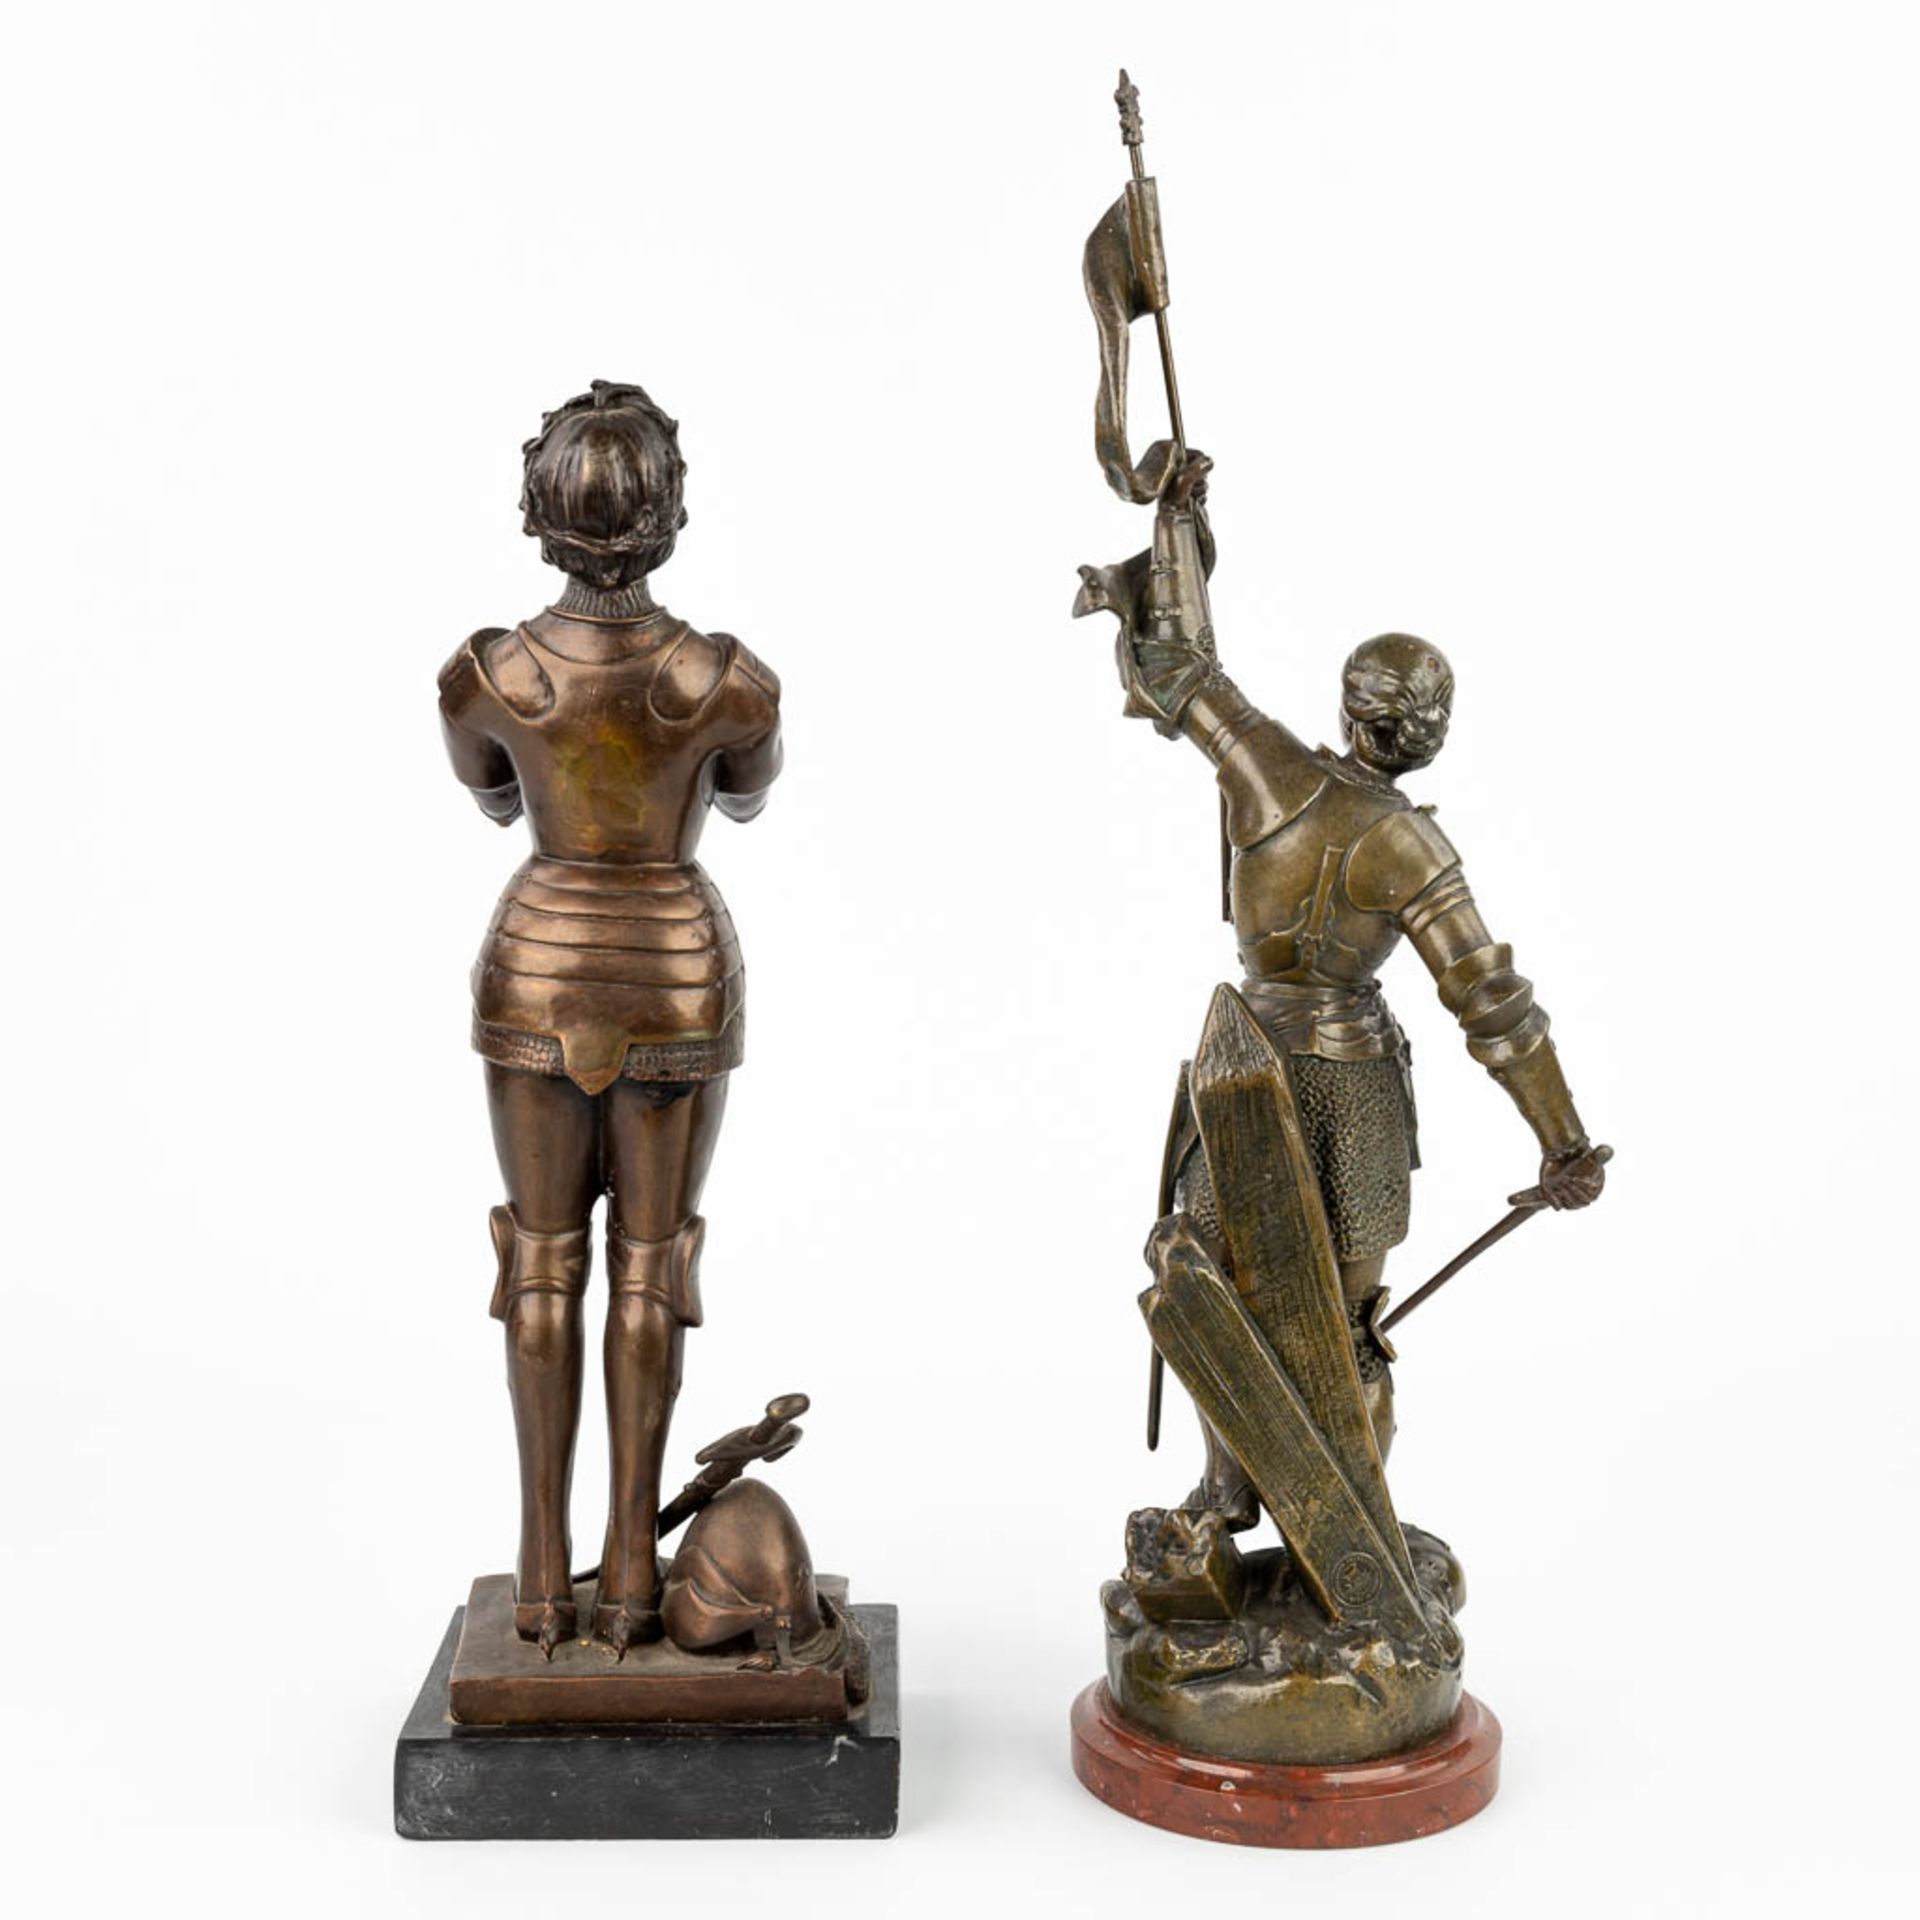 A collection of 2 statues of Jeanne D'arc made of spelter and bronze. (H:50cm) - Image 4 of 12